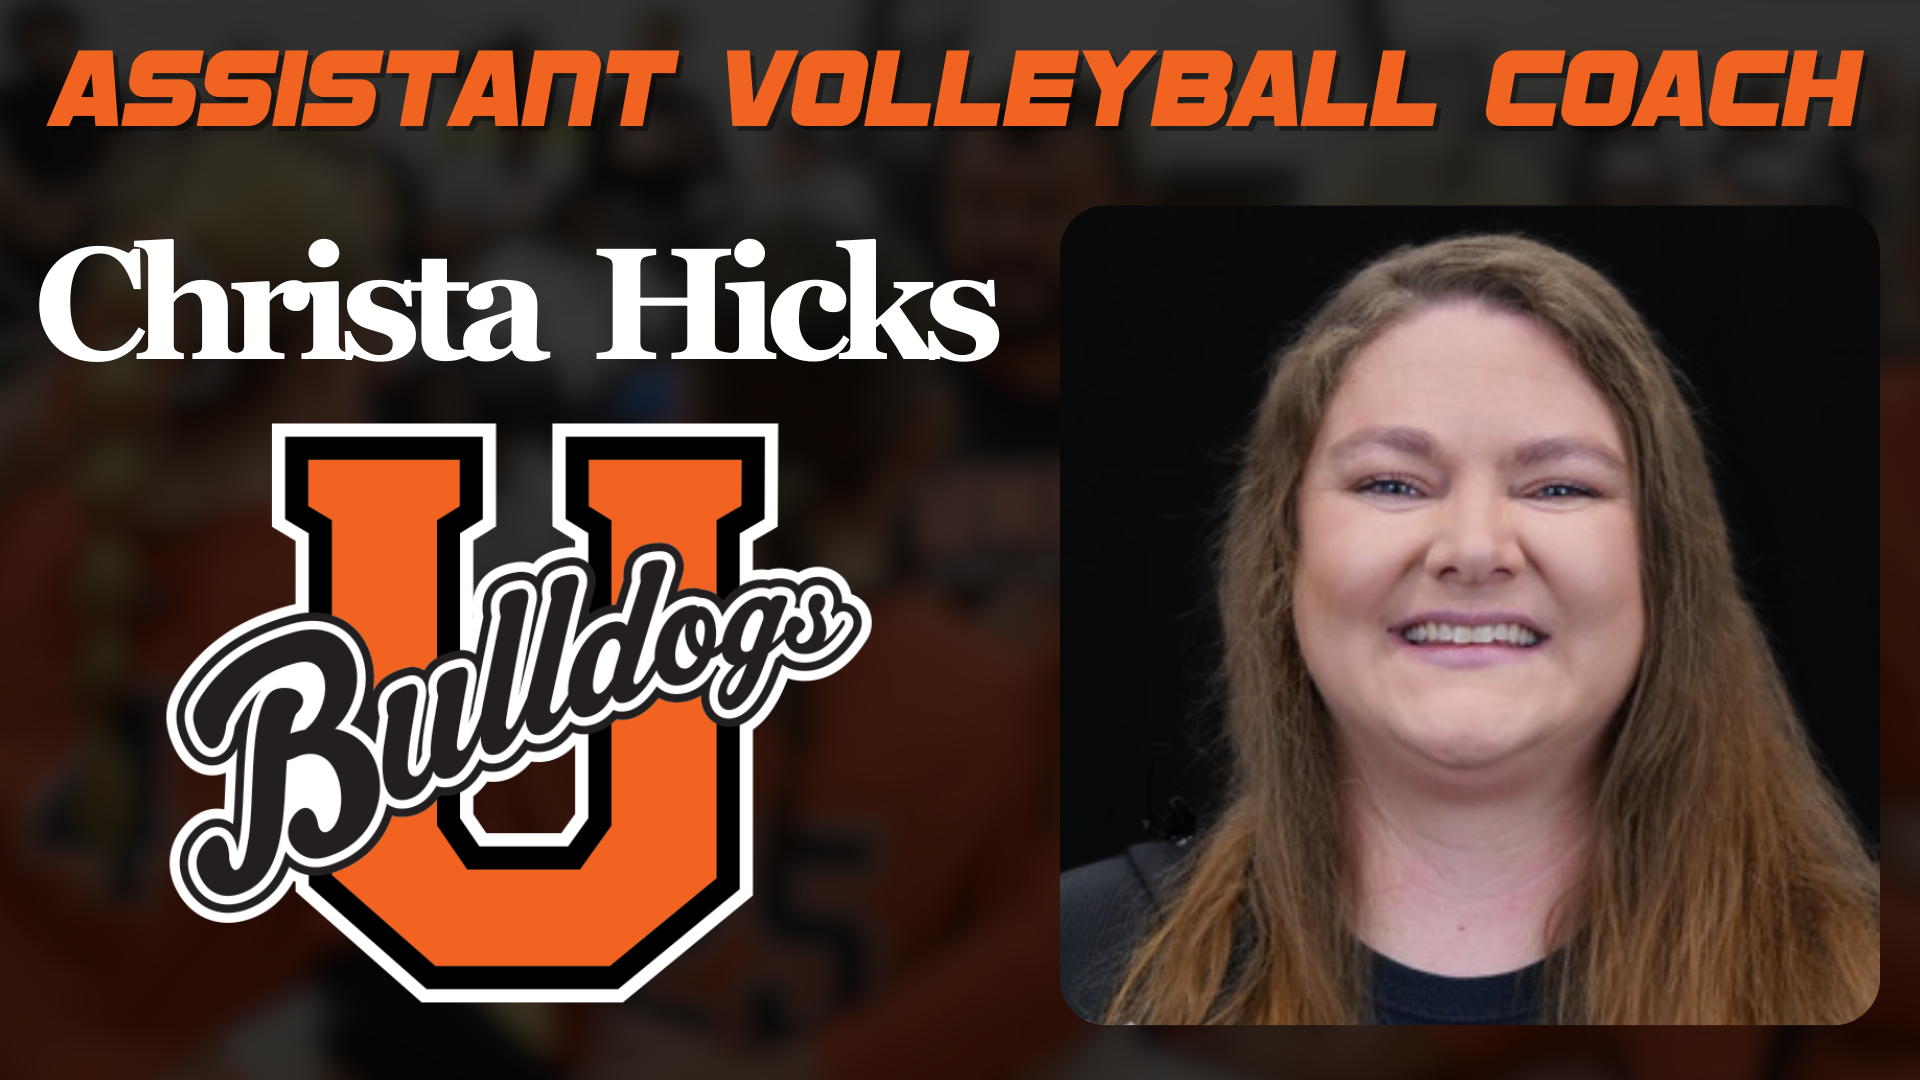 Christa Hicks named Union&rsquo;s assistant volleyball coach